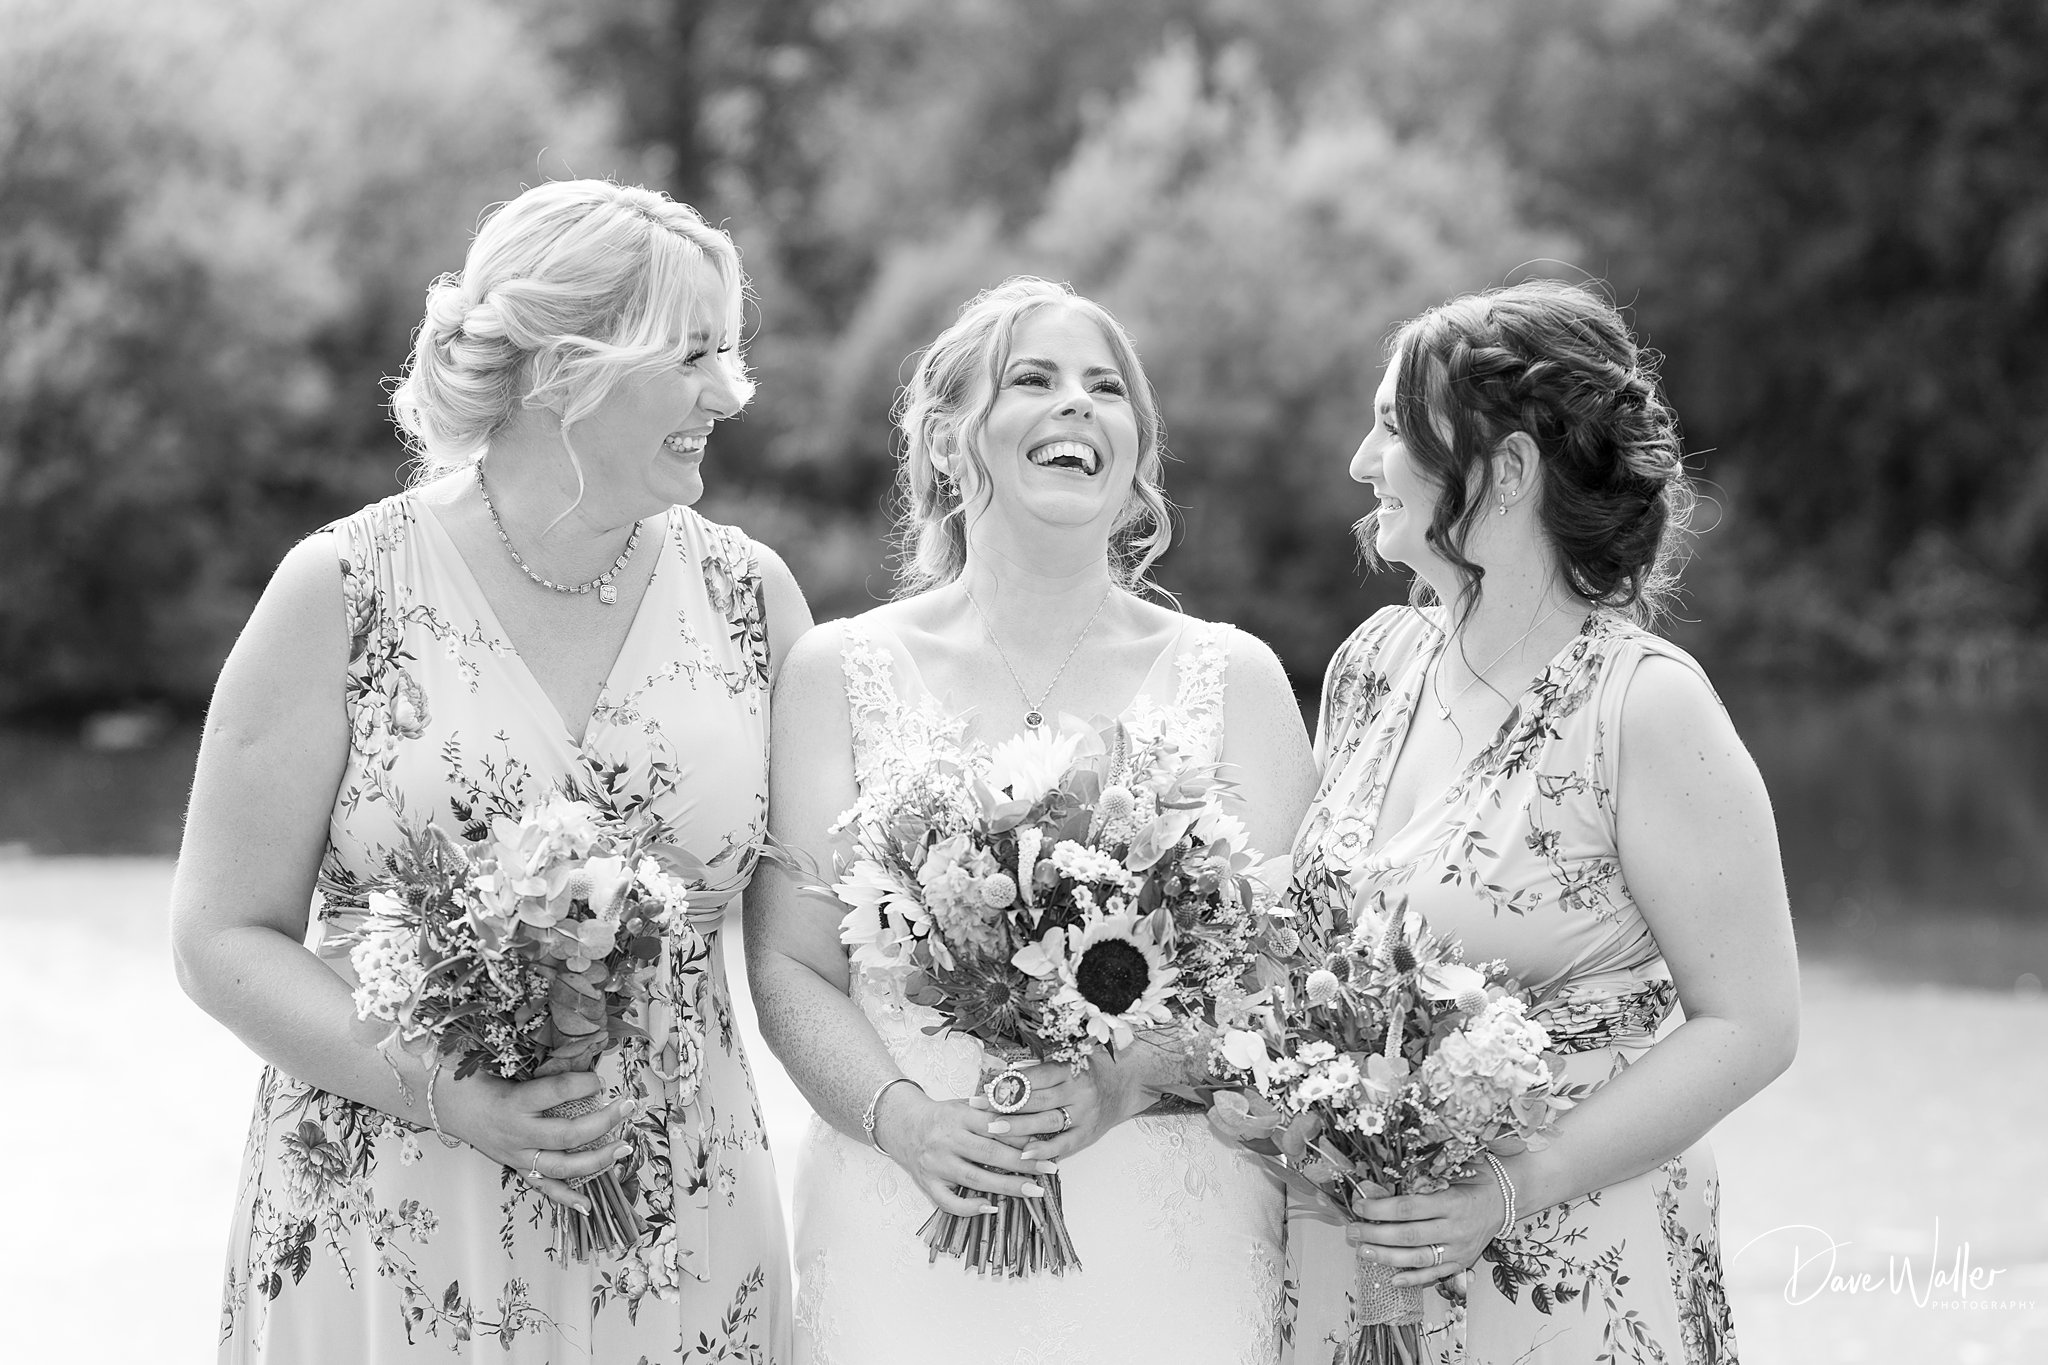 Joyful bride sharing a heartfelt laugh with her bridesmaids, captured by a wedding photographer on her special day at Rudding Park.